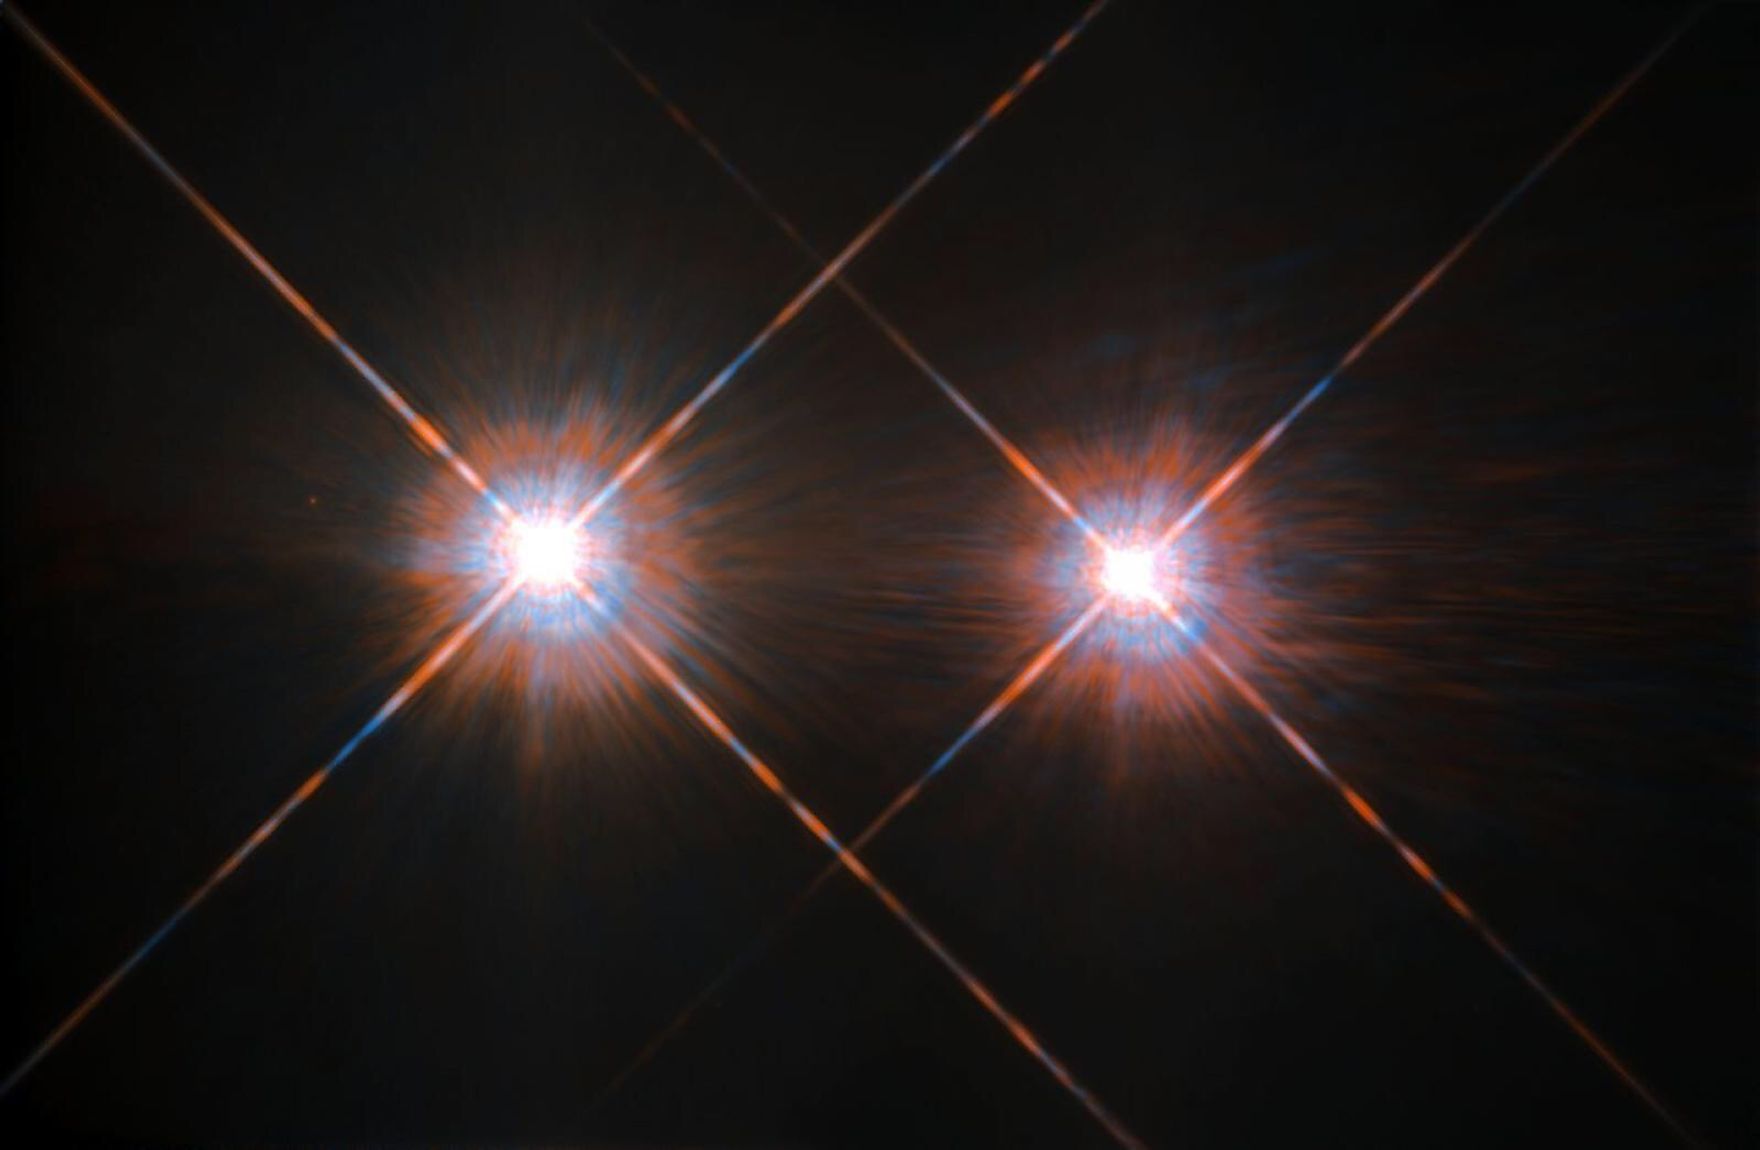 A binary star system containing two red dwarf stars. Image credit: NASA/ESA